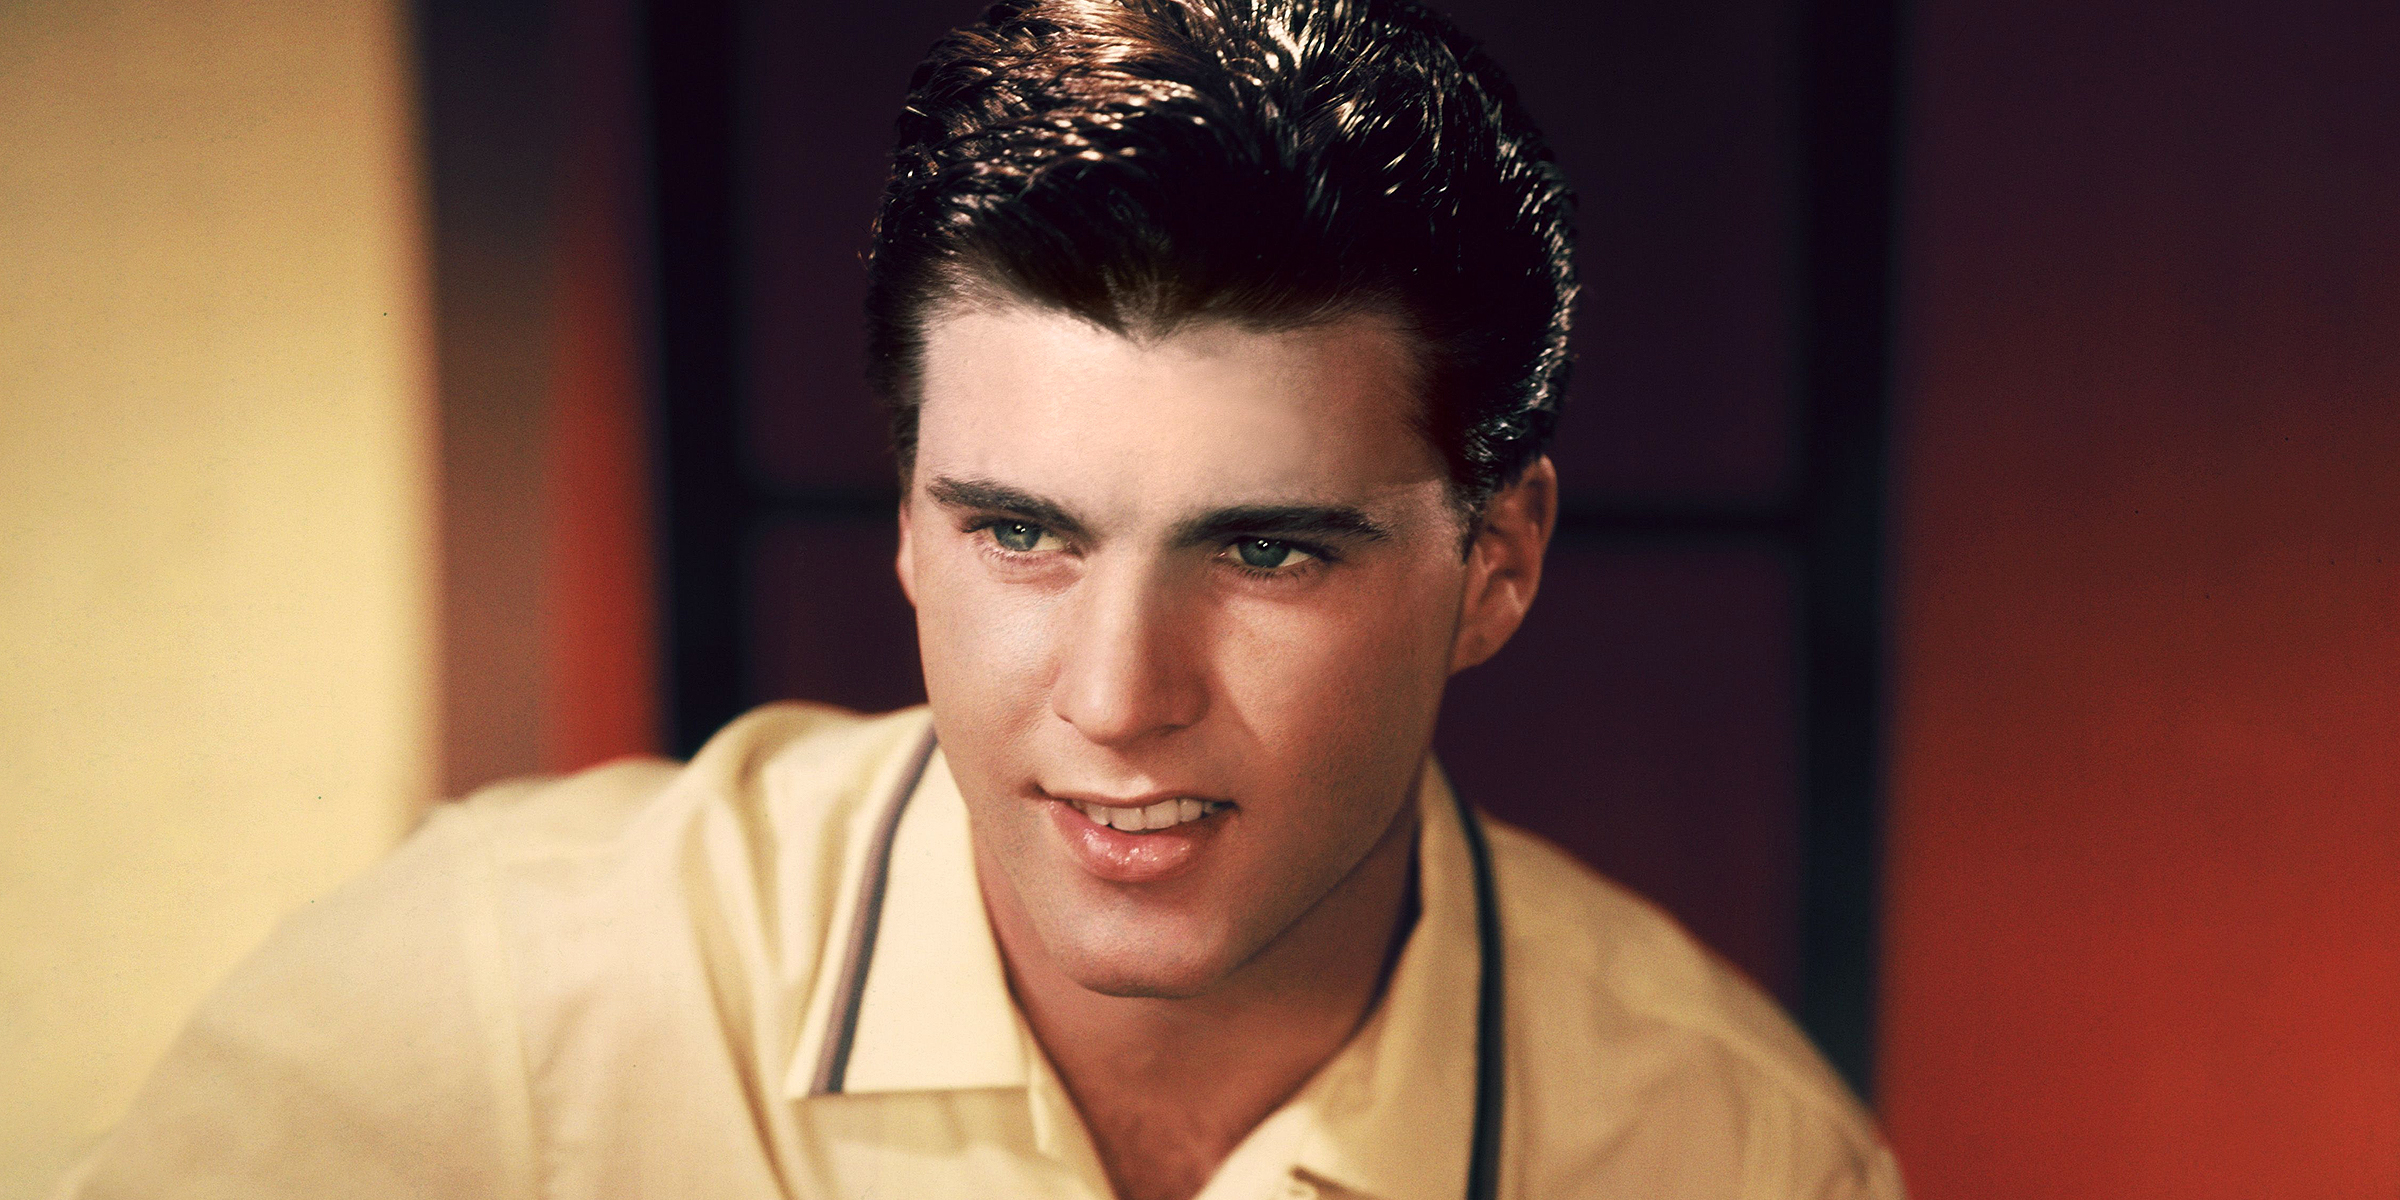 Ricky Nelson | Source: Getty Images